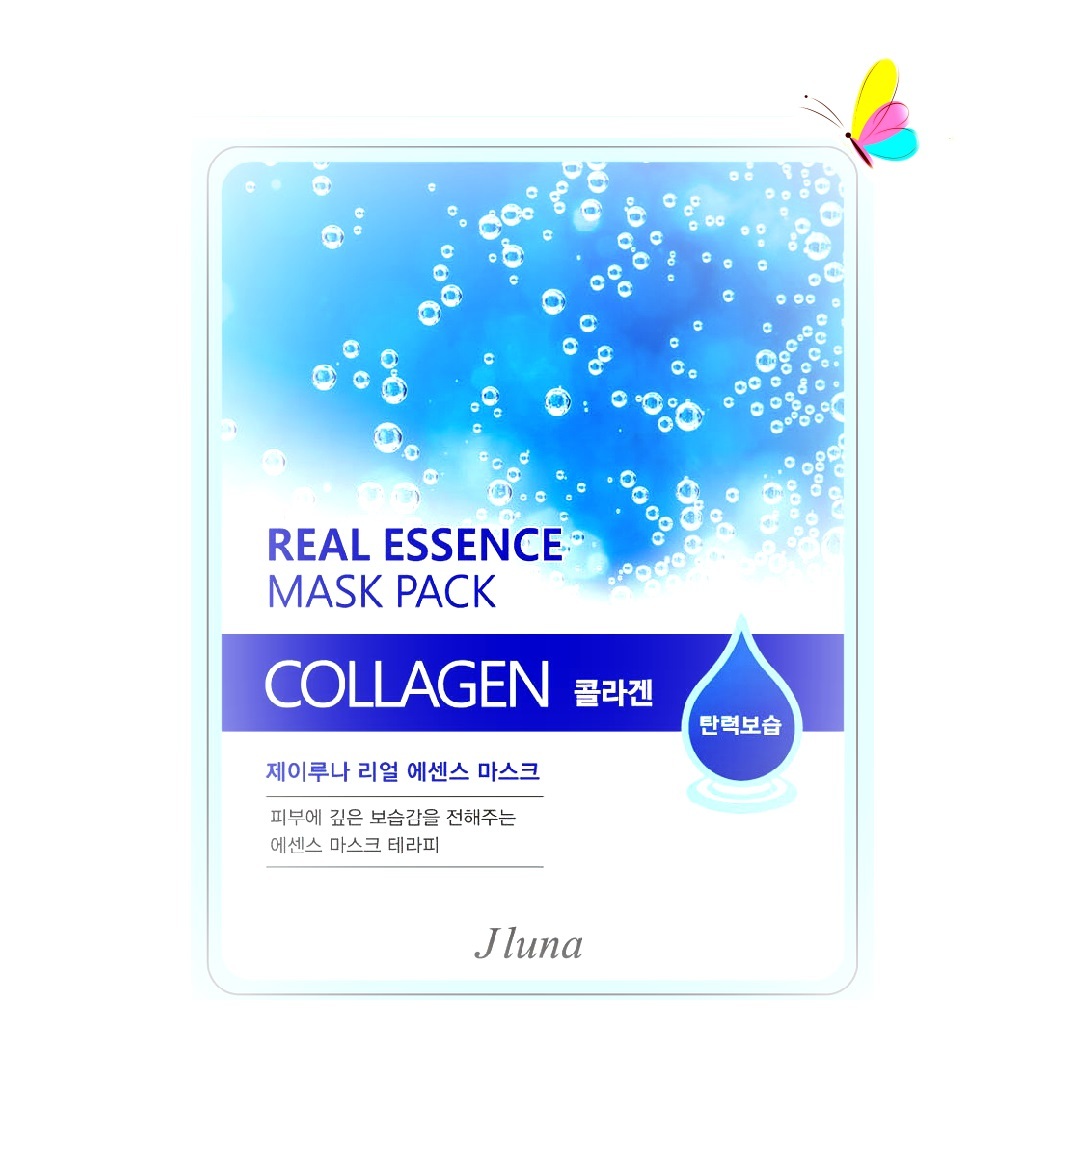 Real Essence Mask Pack Collagen. Real Essence Mask Pack. Real Mango Essence Mask. Маска Collagen Essence Mask отзывы. Really essential